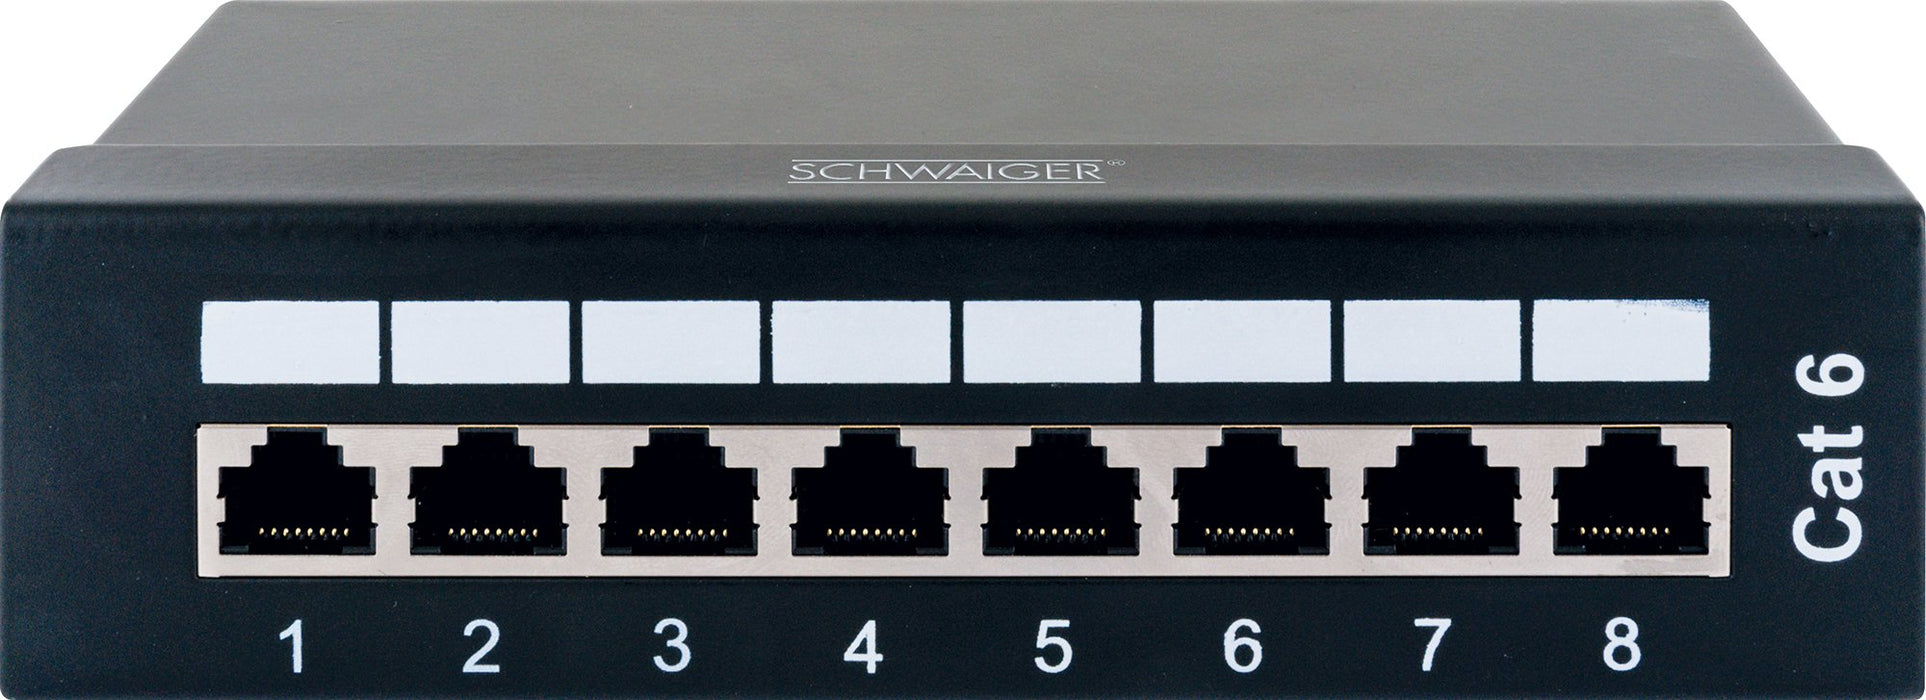 8-Port Patchpanel